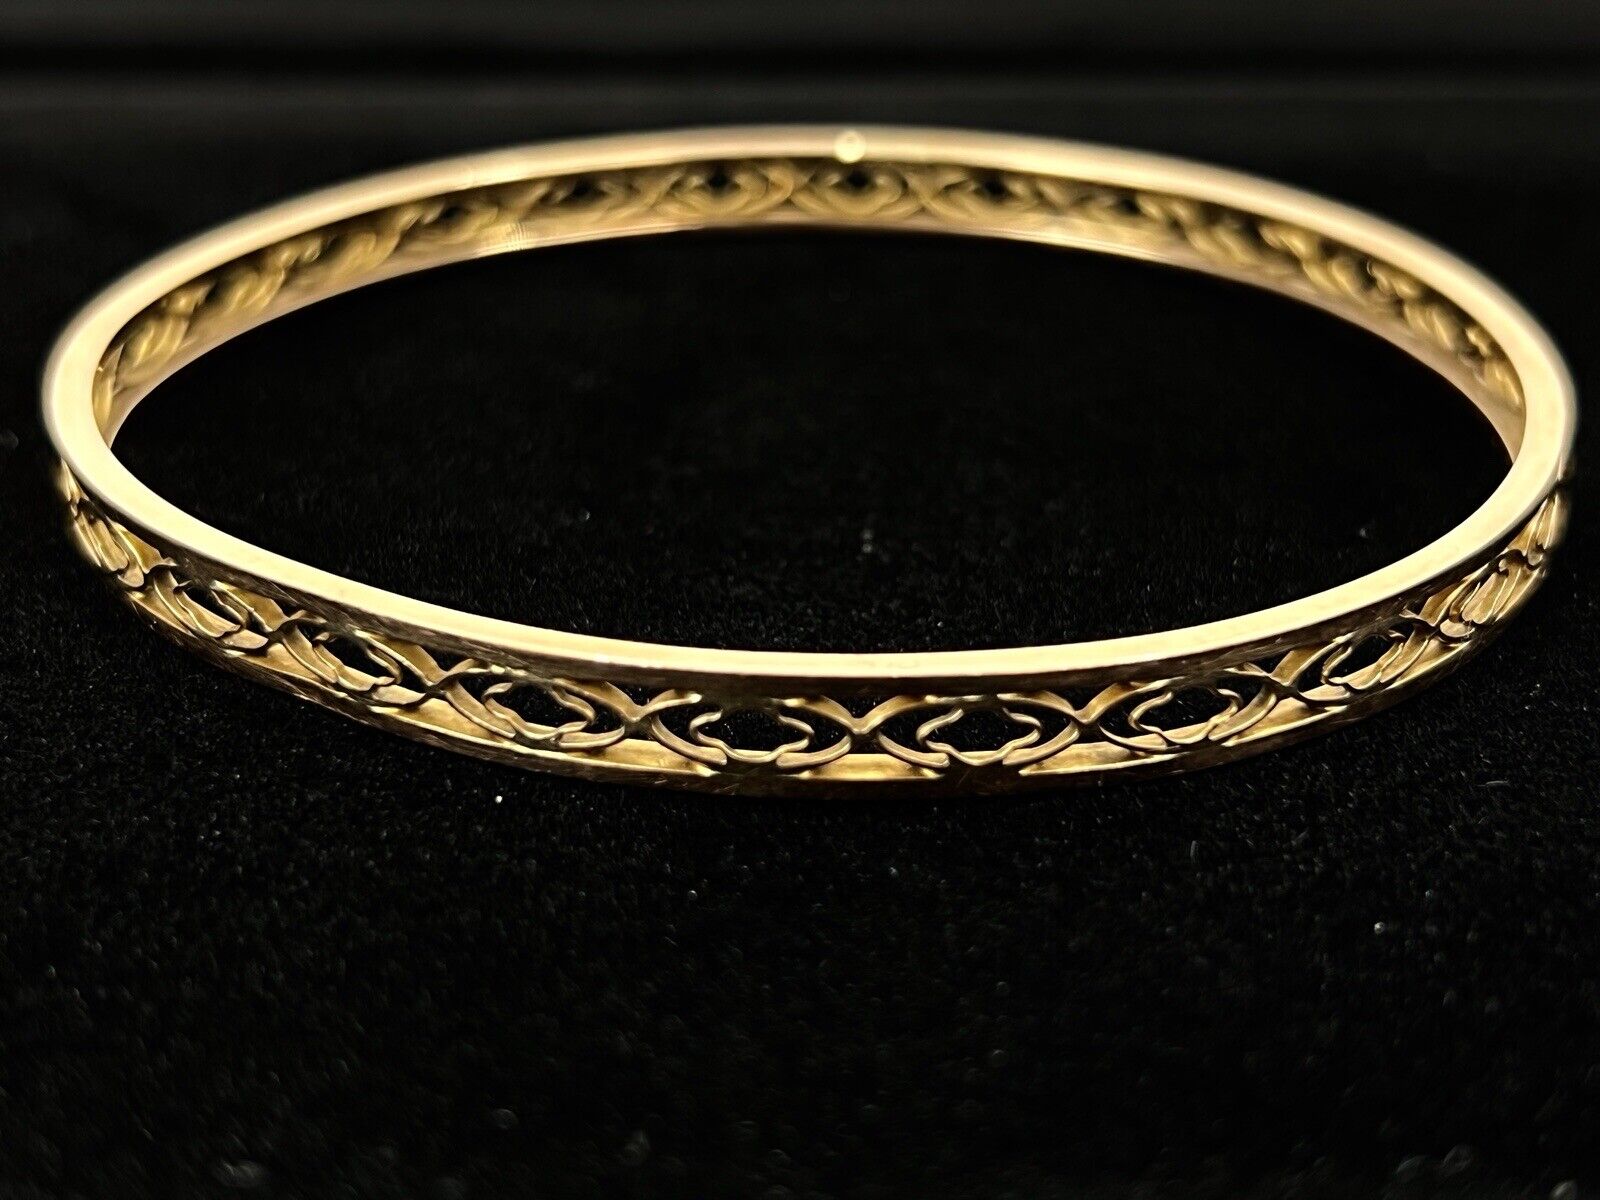 9ct Yellow Gold Slave Bracelet / Bangle, 10.0g and 82mm Diameter